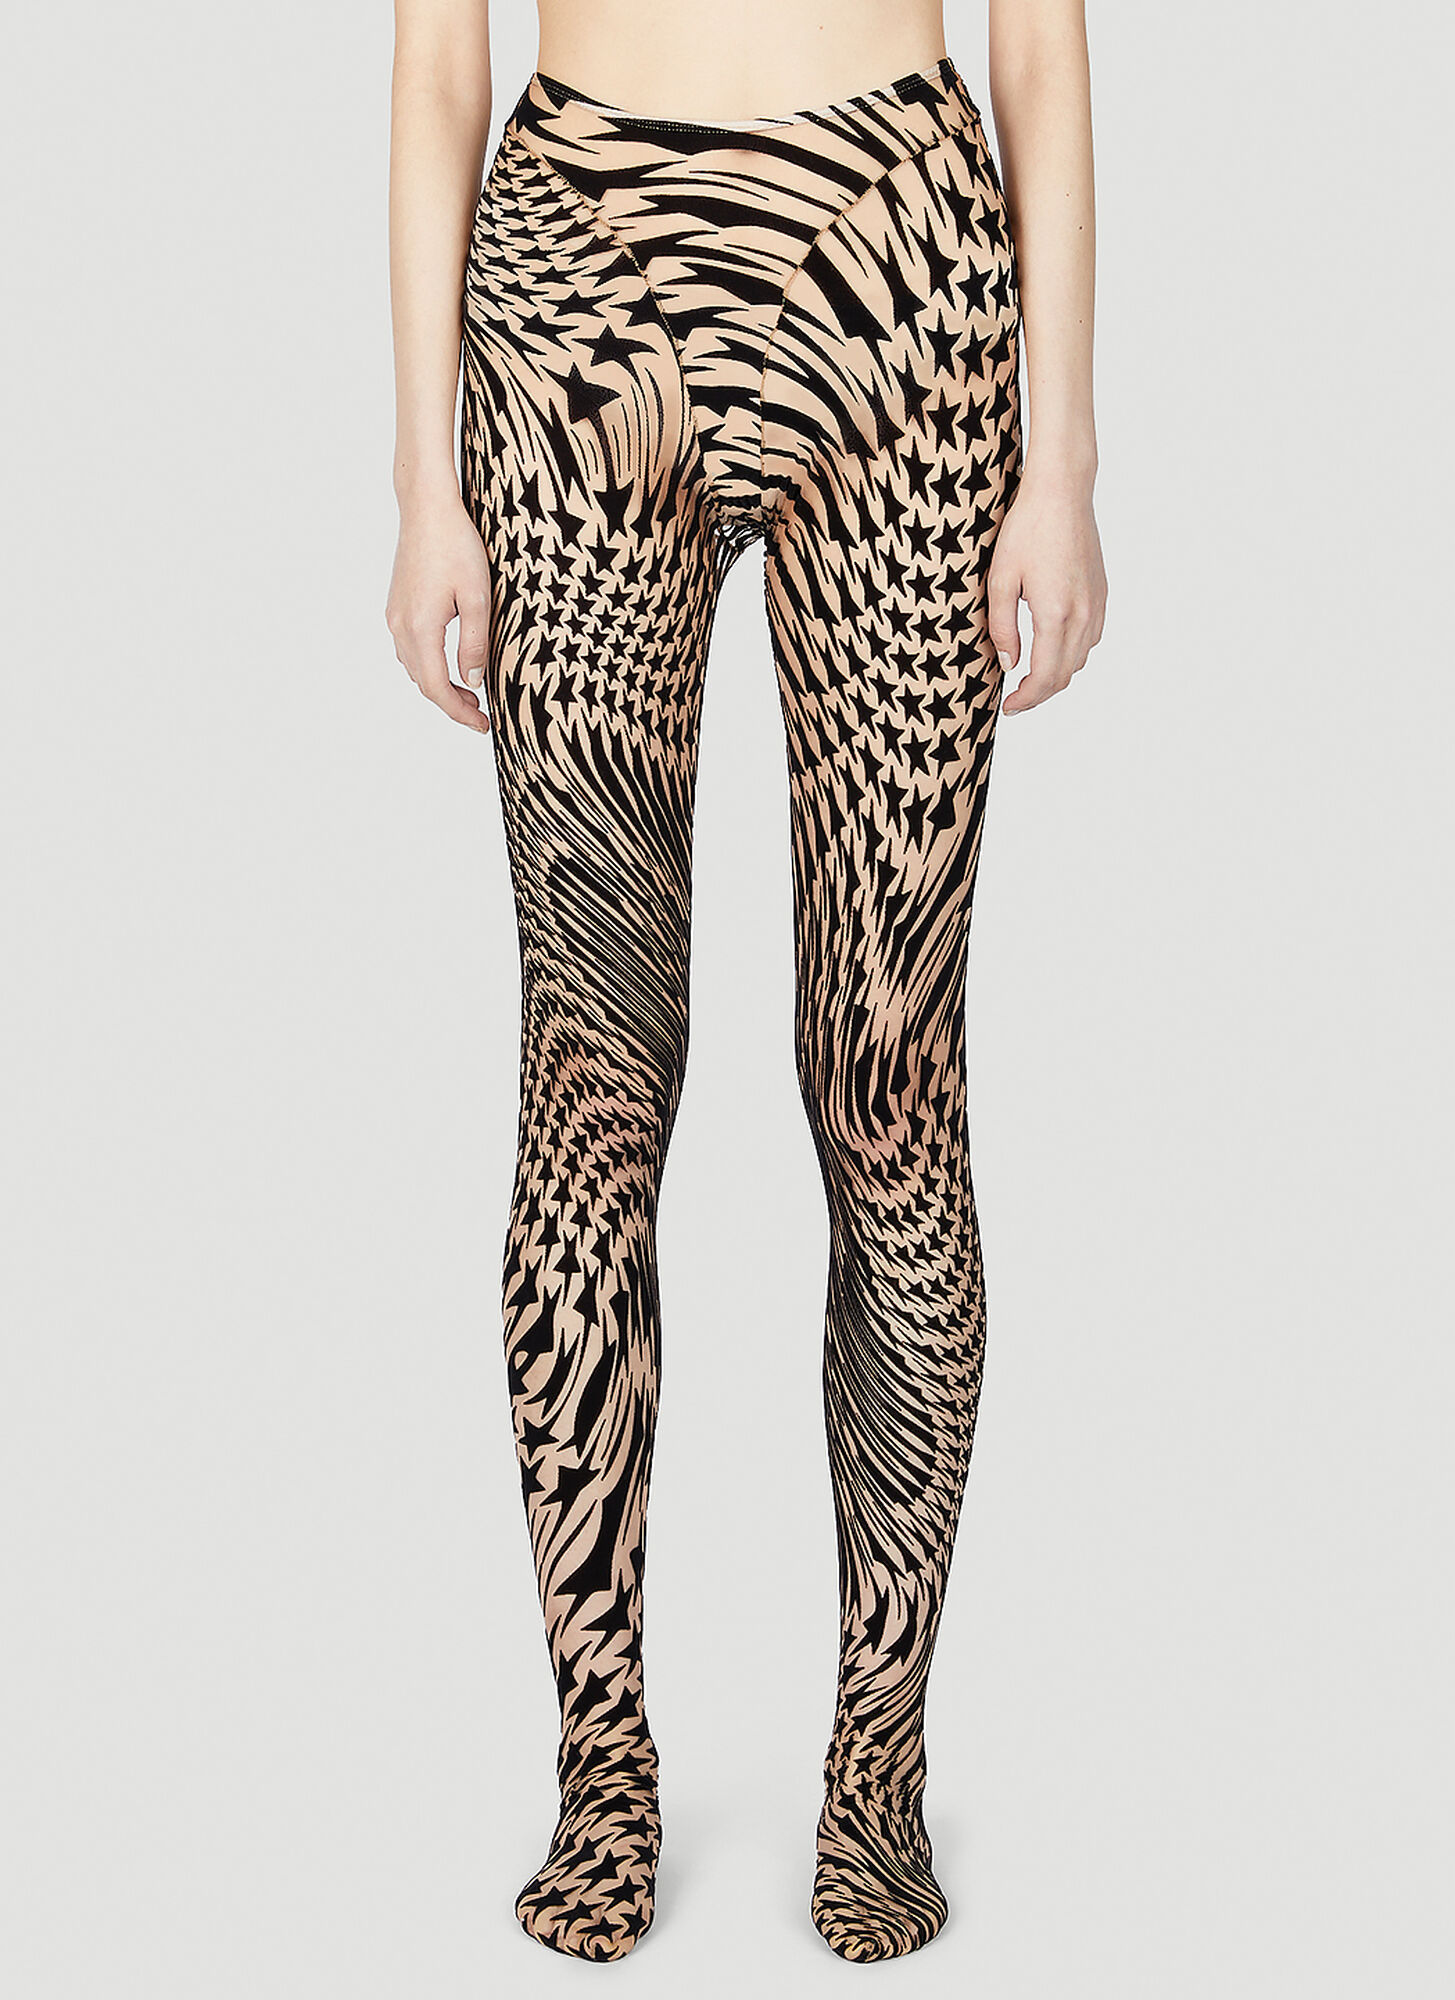 Rane crystal-embellished stretch-jersey tights